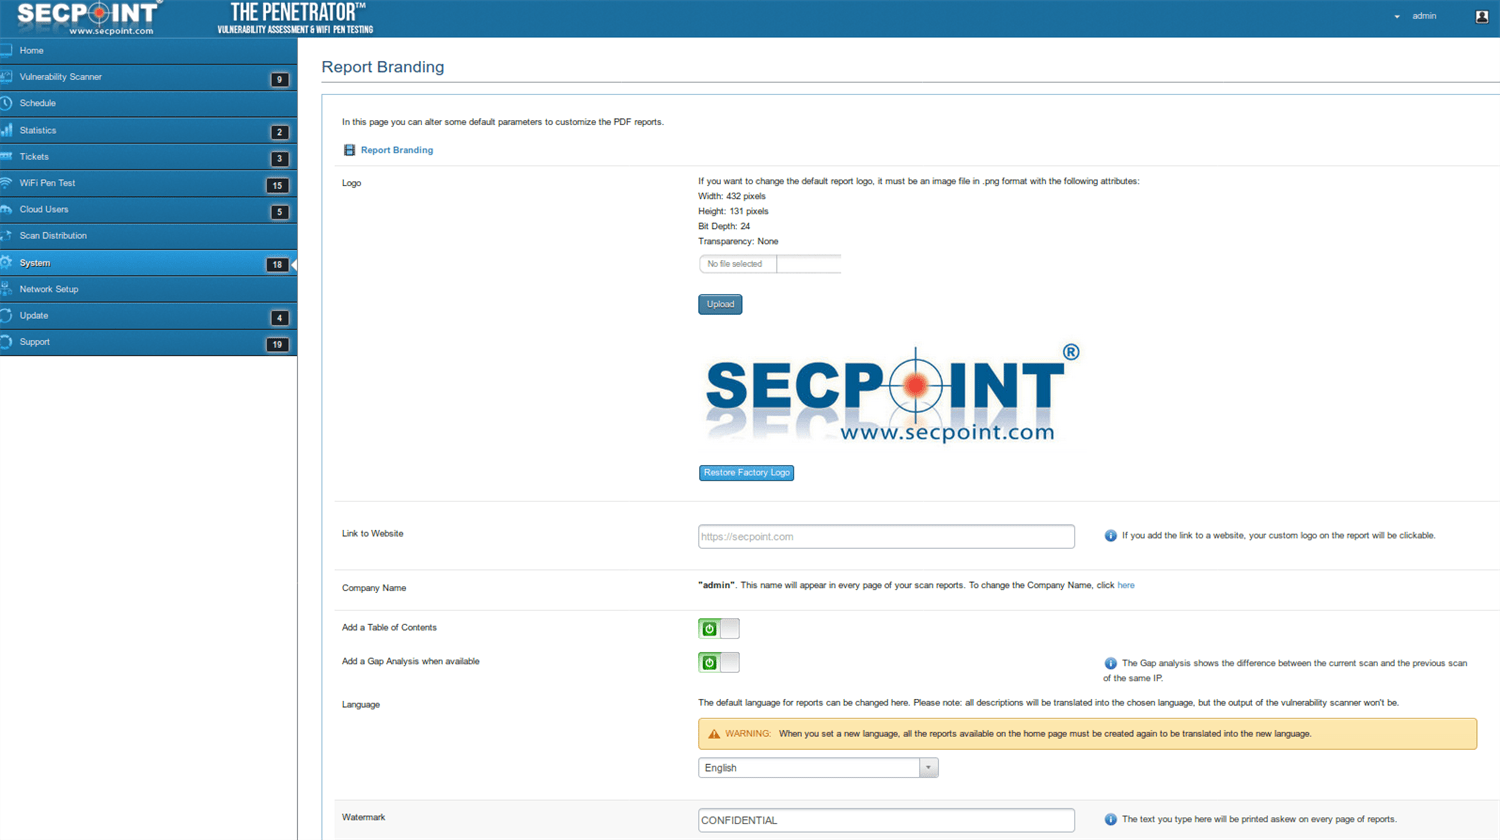 SecPoint Penetrator S9 - Security Software Vulnerability Assessment - SecPoint